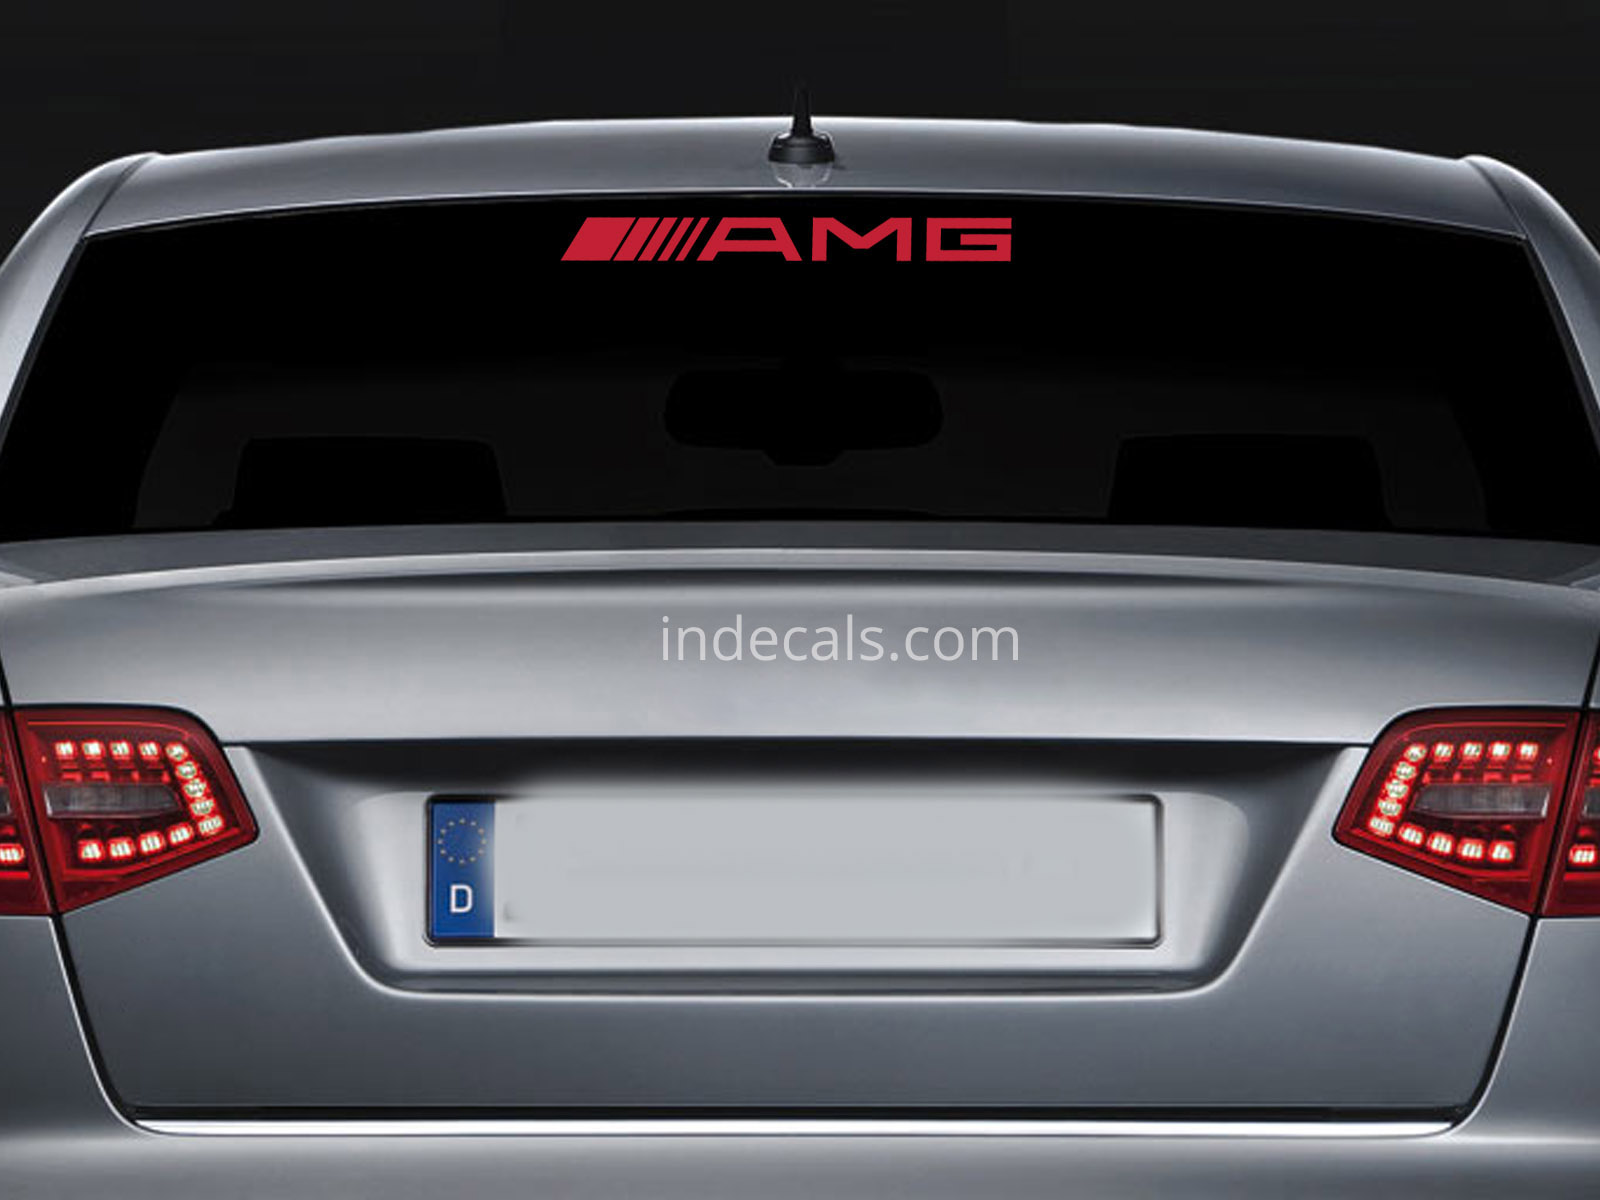 1 x AMG Performance Sticker for Windshield or Back Window - Red